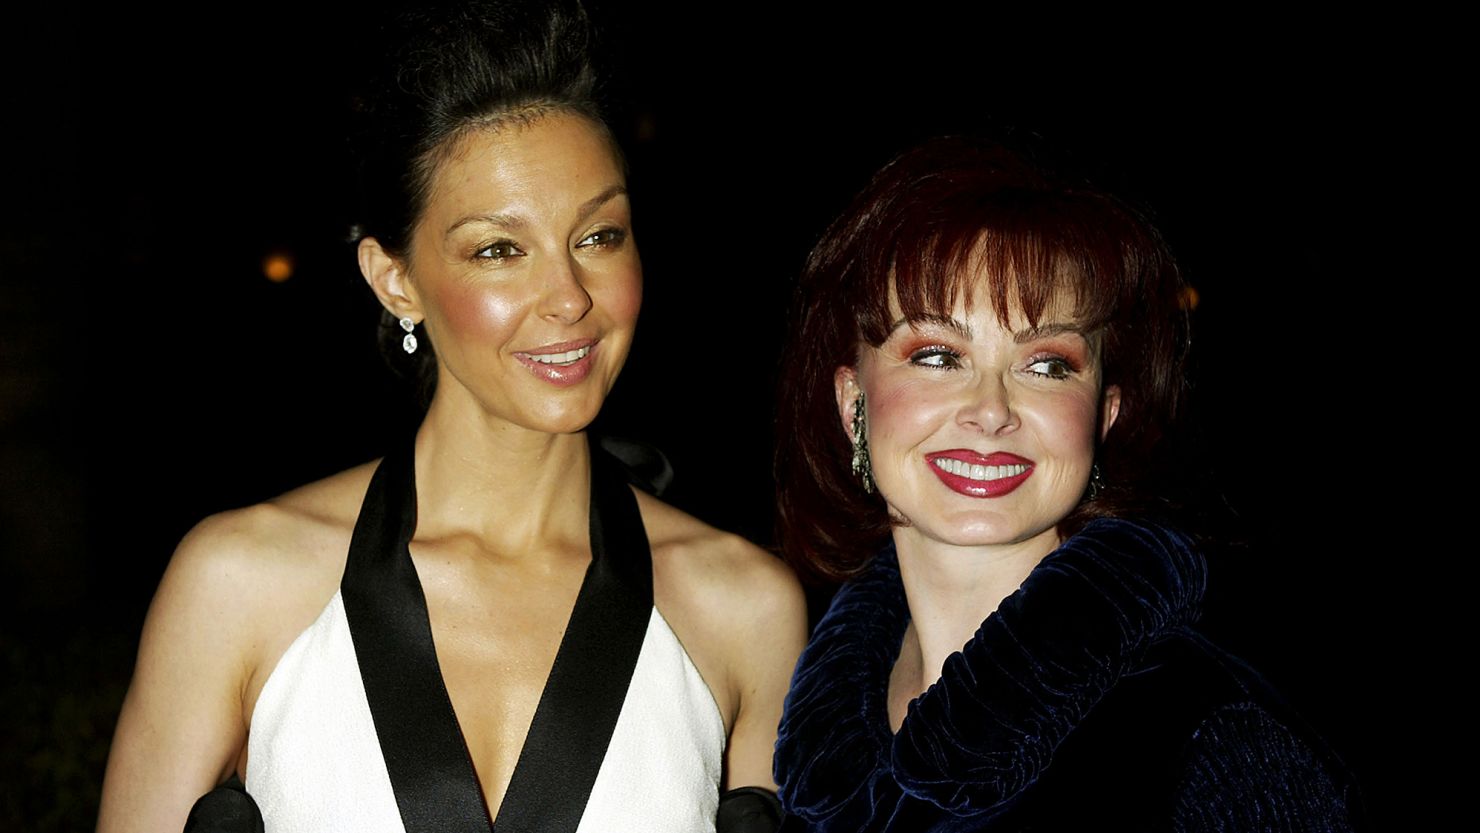 Ashley Judd and Naomi Judd, who took her own life last year.